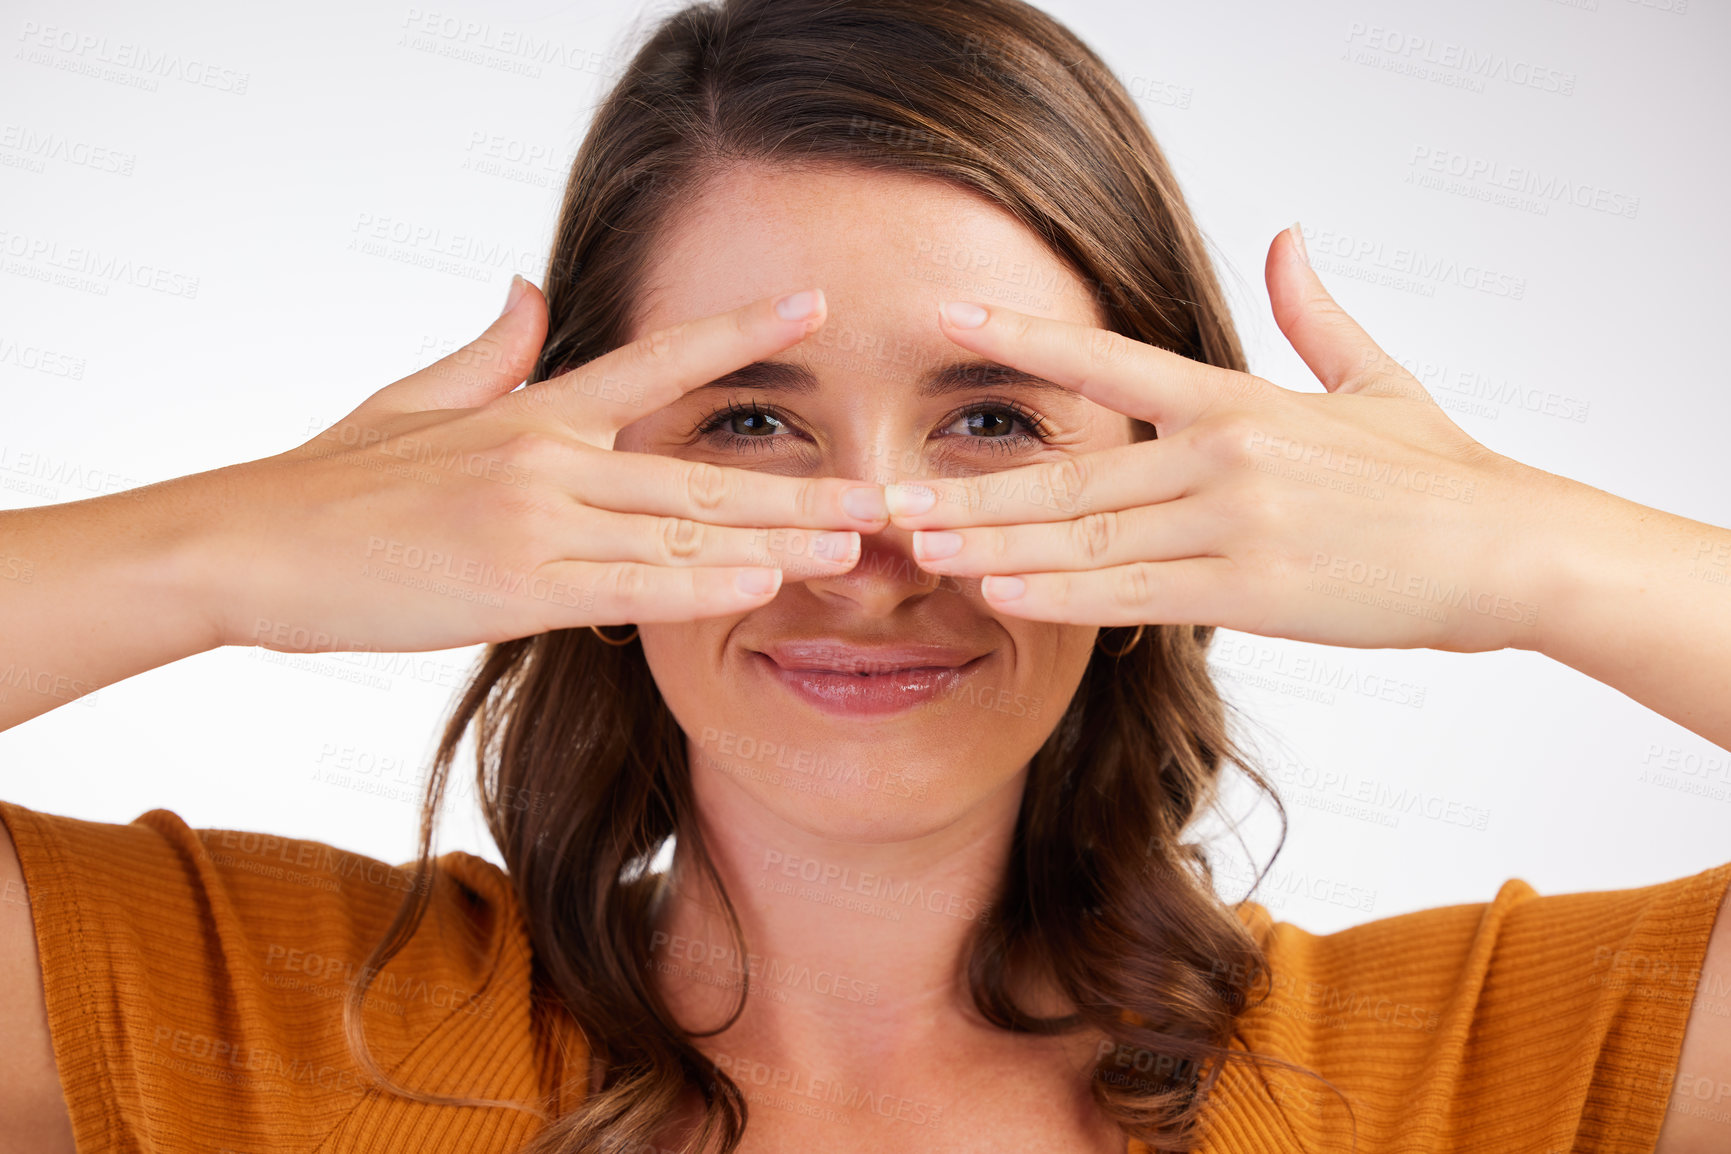 Buy stock photo Studio shot of a young woman covering her face with her hands against a white background